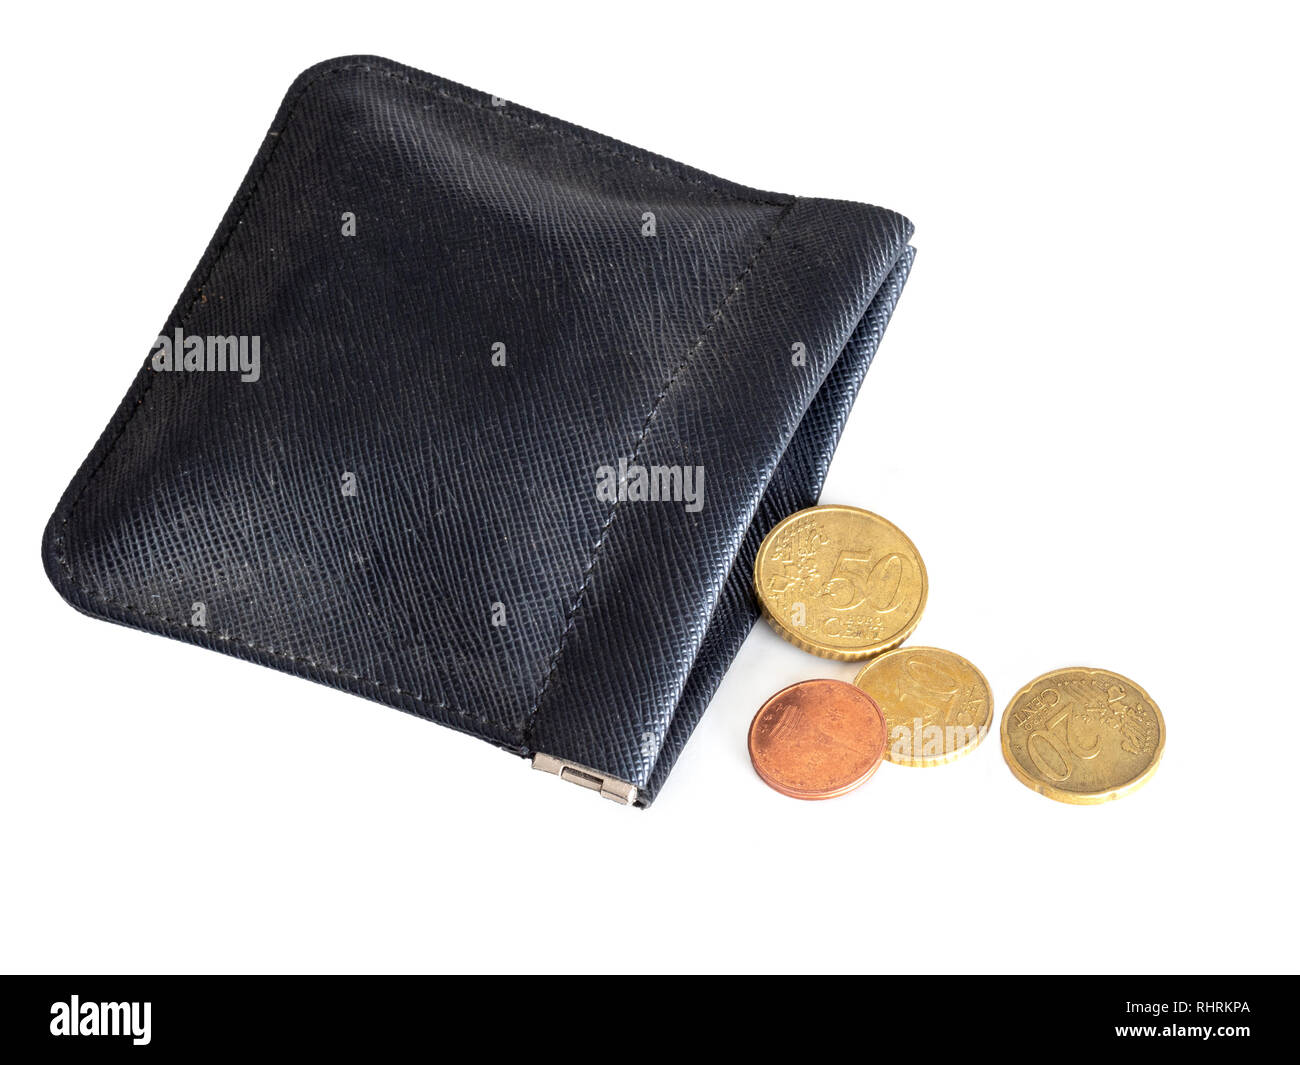 Purse almost empty, running out of money, euros. Financial, banking crisis, EU, Europe, Italy etc or poverty in the Union. Concept, metaphor. Stock Photo